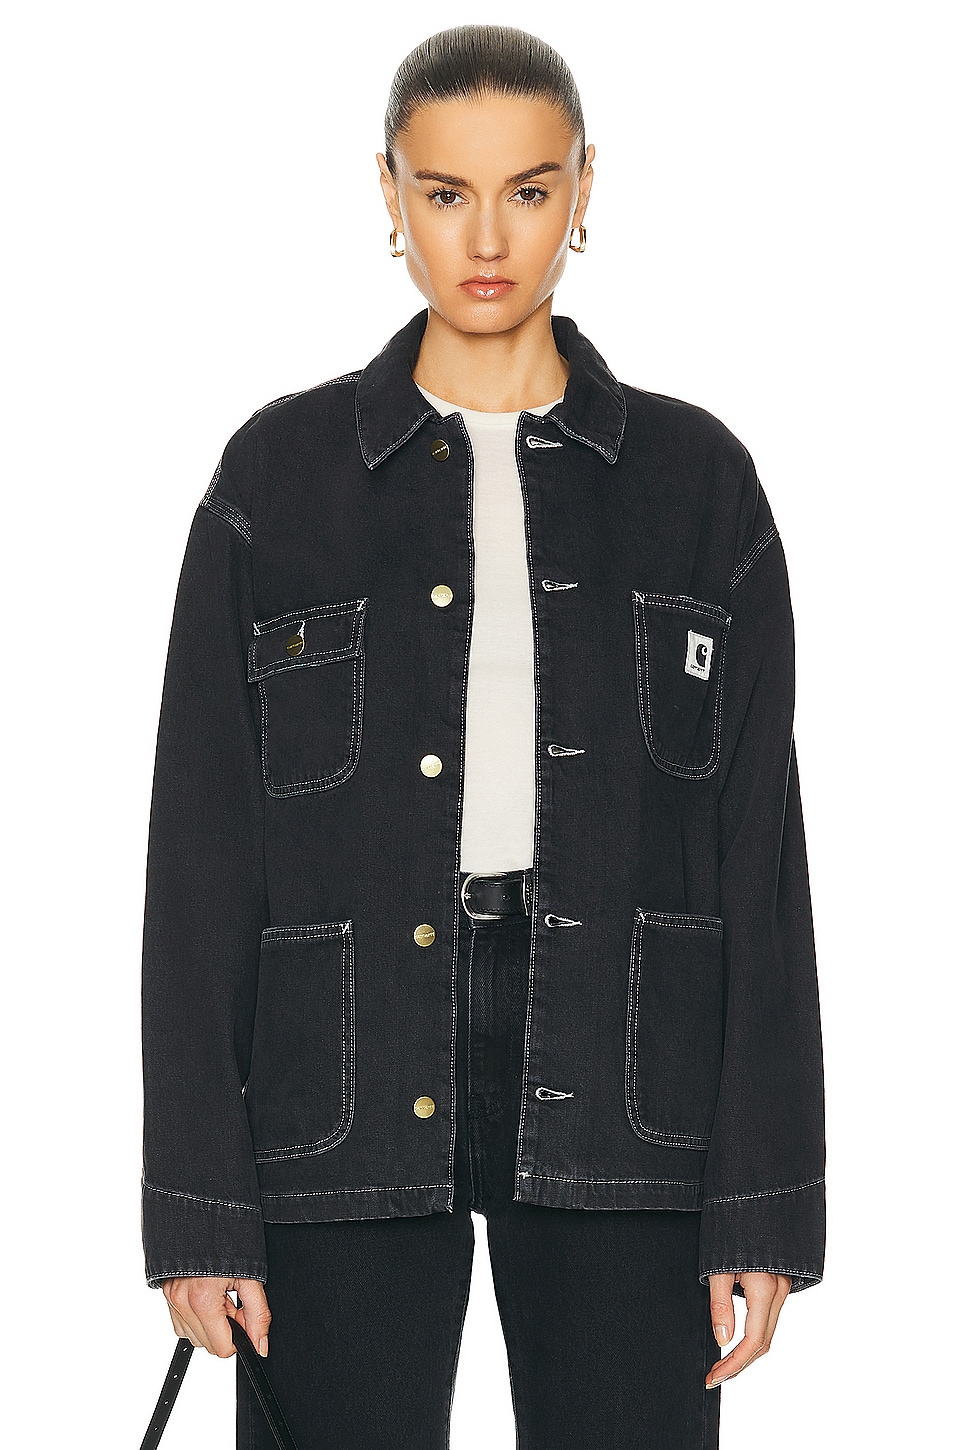 Image 1 of Carhartt WIP OG Michigan Coat in Black Stone Washed